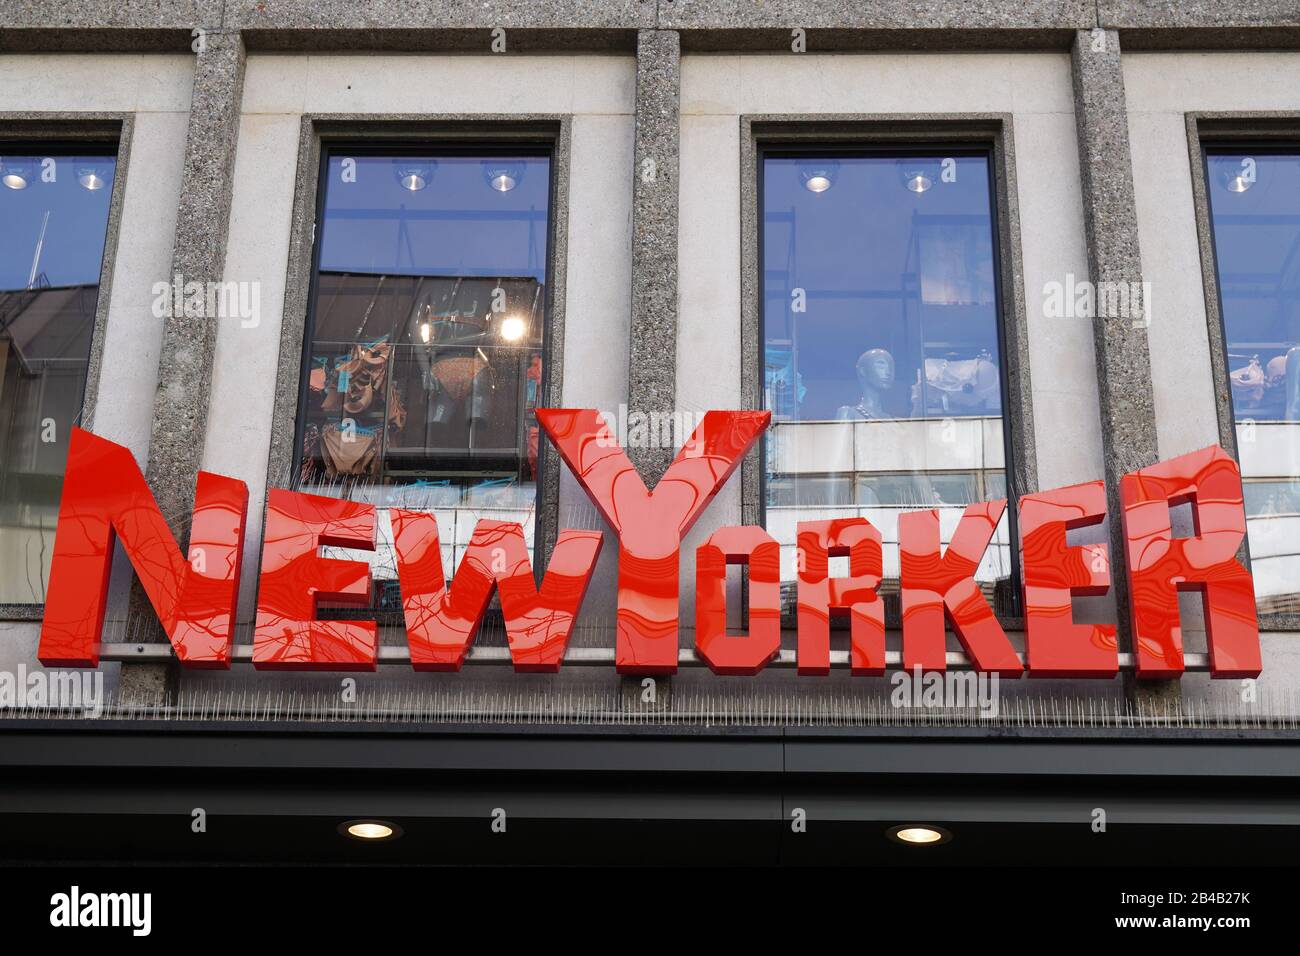 Hannover, Germany - March 2, 2020: New Yorker brand and company name sign of german fashion clothing retail chain store Stock Photo